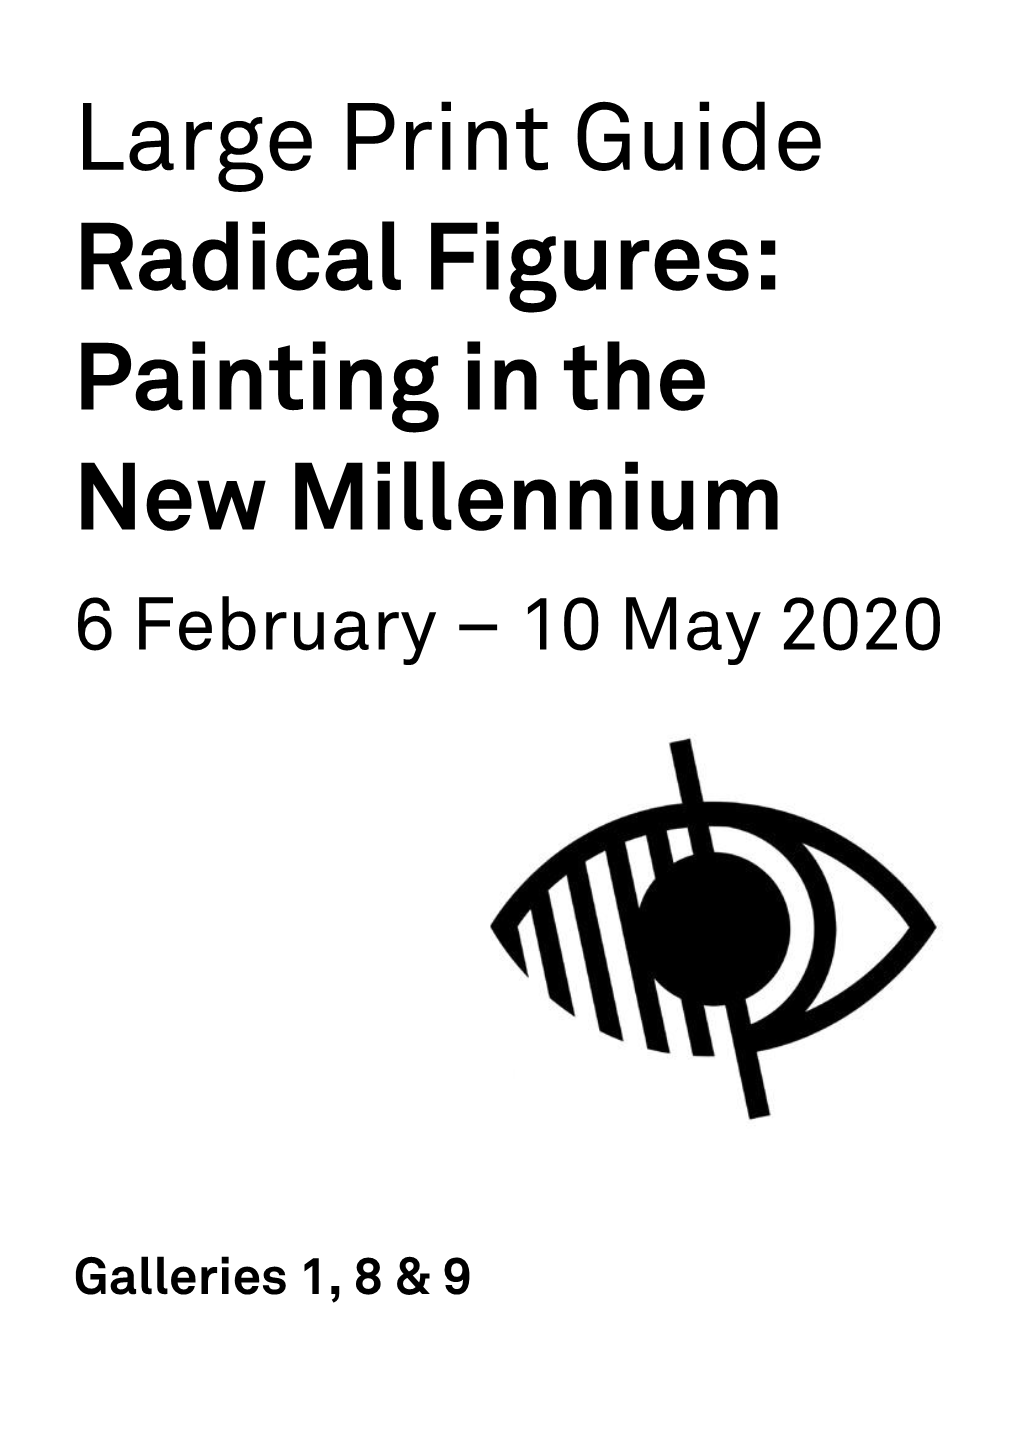 Large Print Guide Radical Figures: Painting in the New Millennium 6 February – 10 May 2020